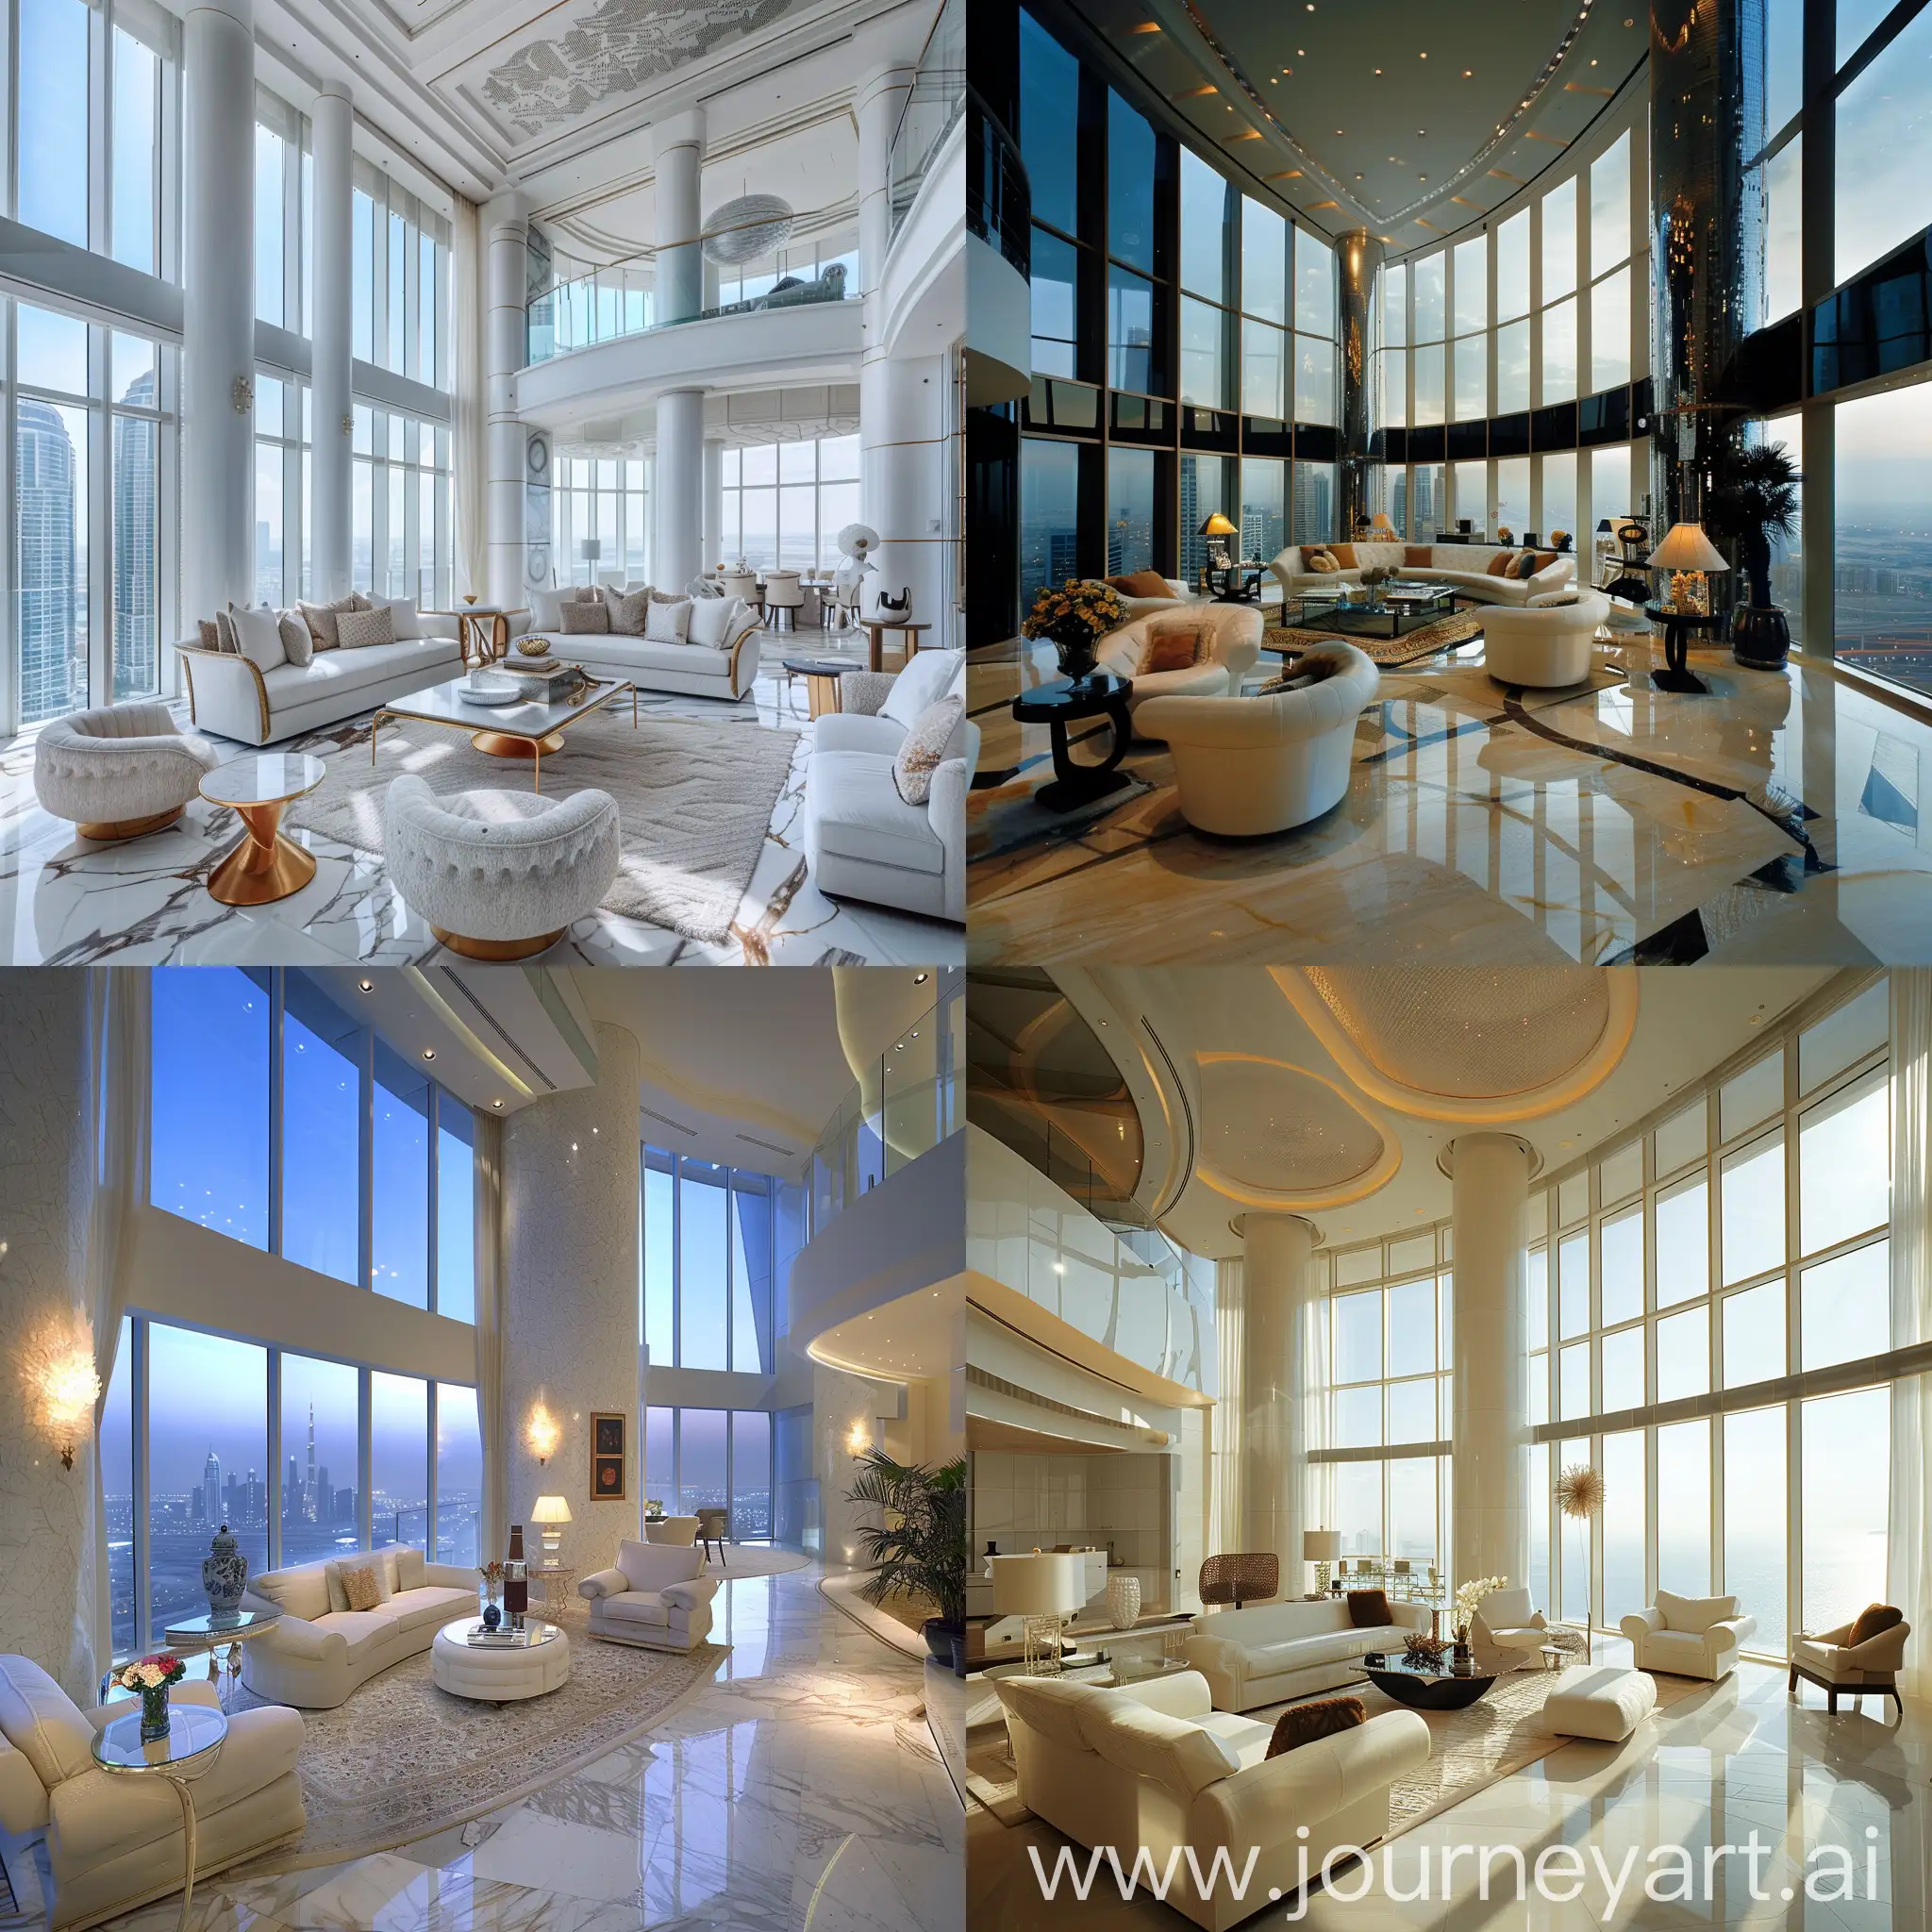 neo-cosmic style liveing room, double length floor to celling windows, high celling, Dubai penthouse 